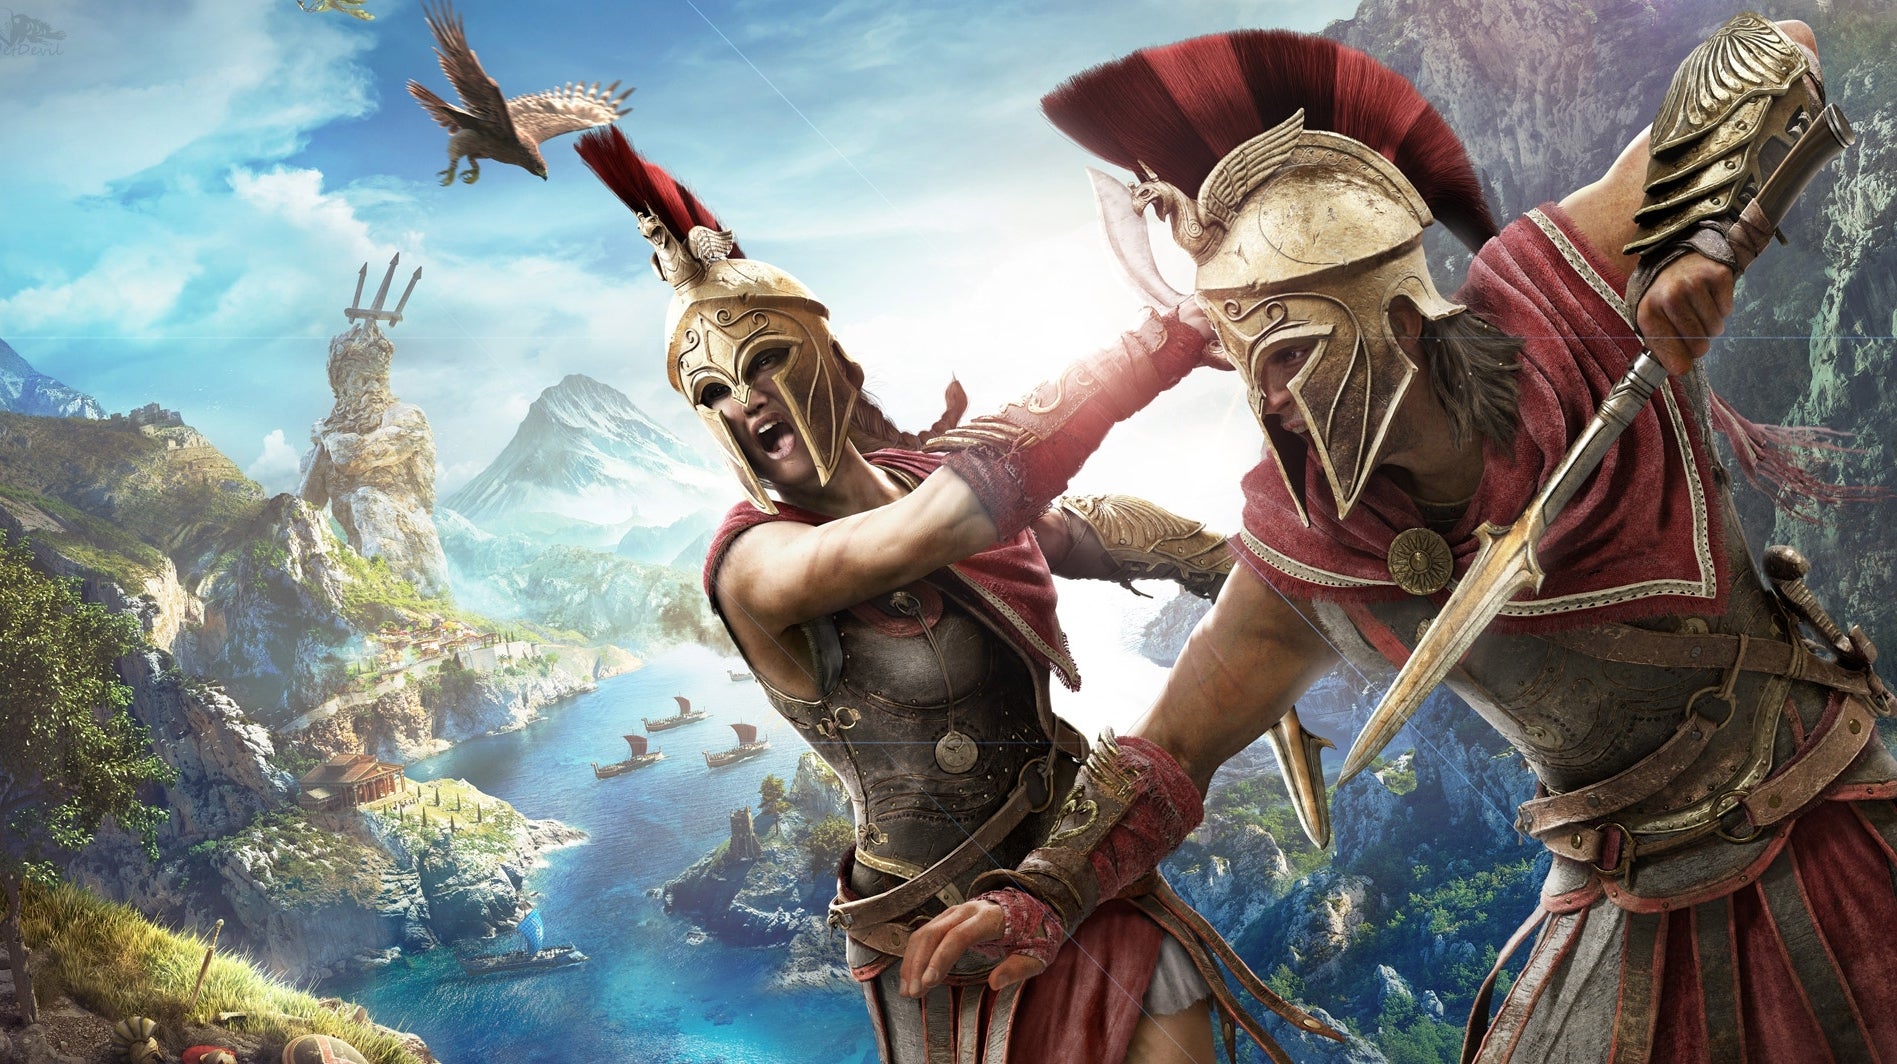 Image for Assassin's Creed Odyssey physical sales down 25% on Origins